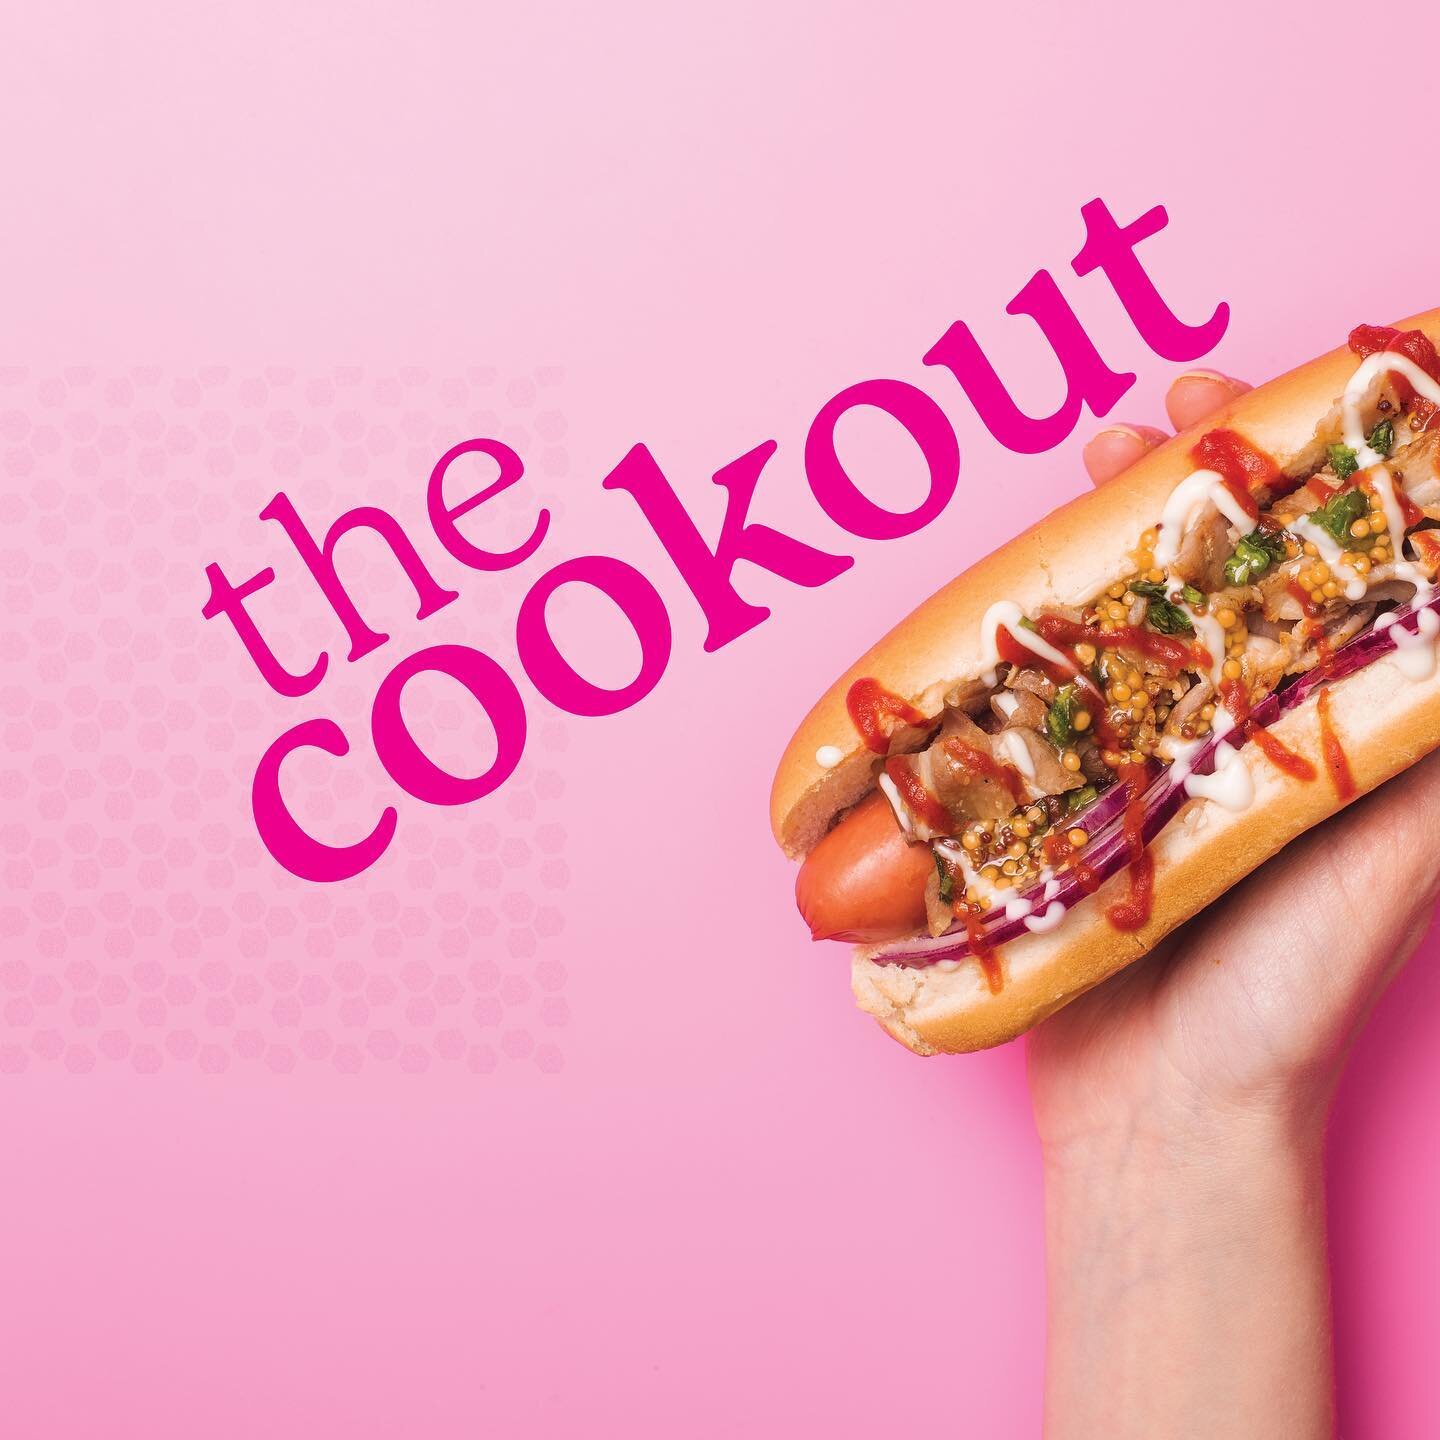 what's that you say? the hot dog is an American cultural icon? yes it is. 
every summer, between memorial day and labor day, Americans eat 7 billion hot dogs. most people consider a cookout incomplete without them. over 25 regional hot dogs with vari